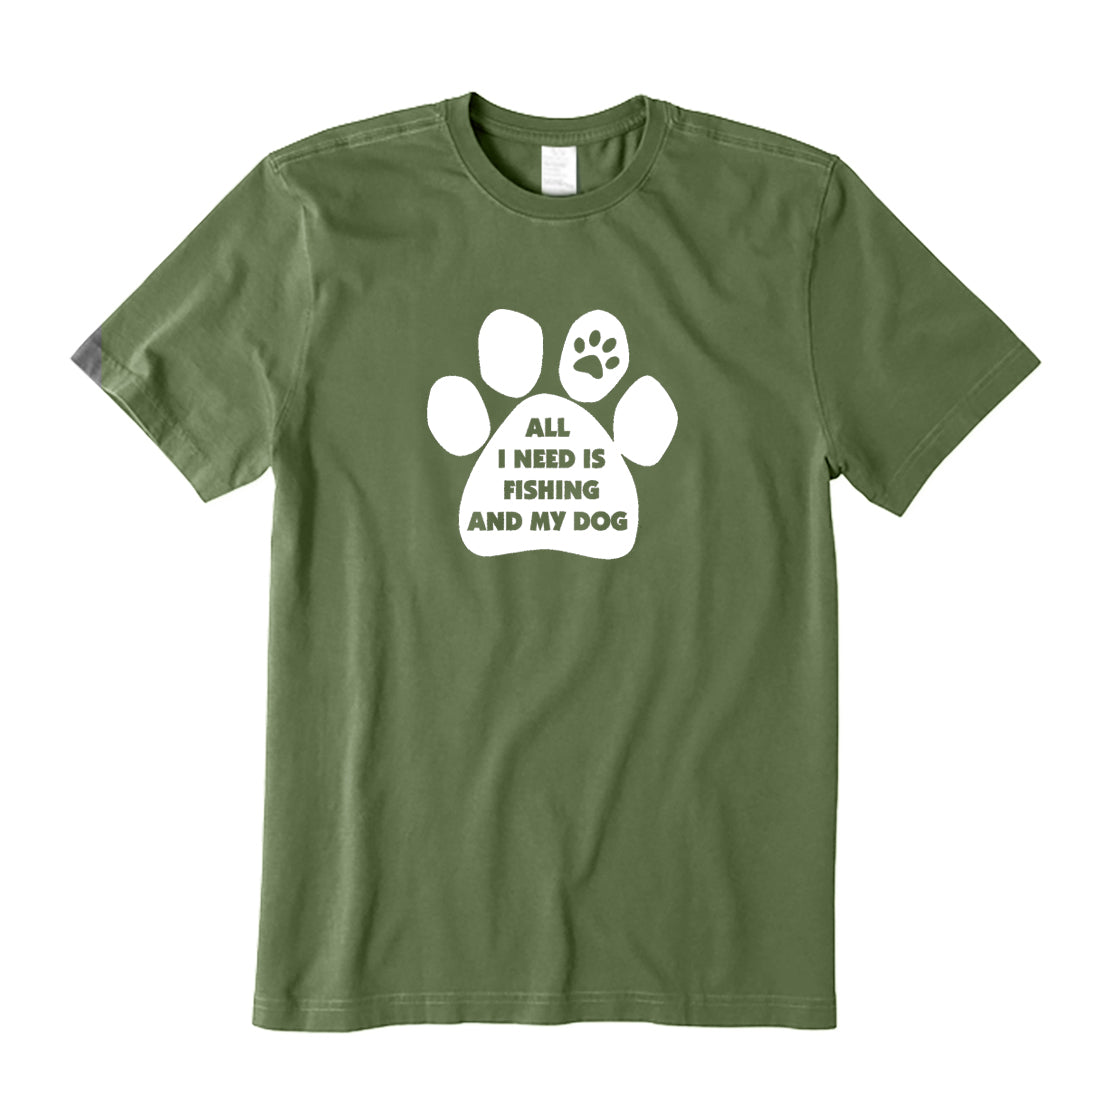 All I Need Is Fishing And My Dog T-Shirt